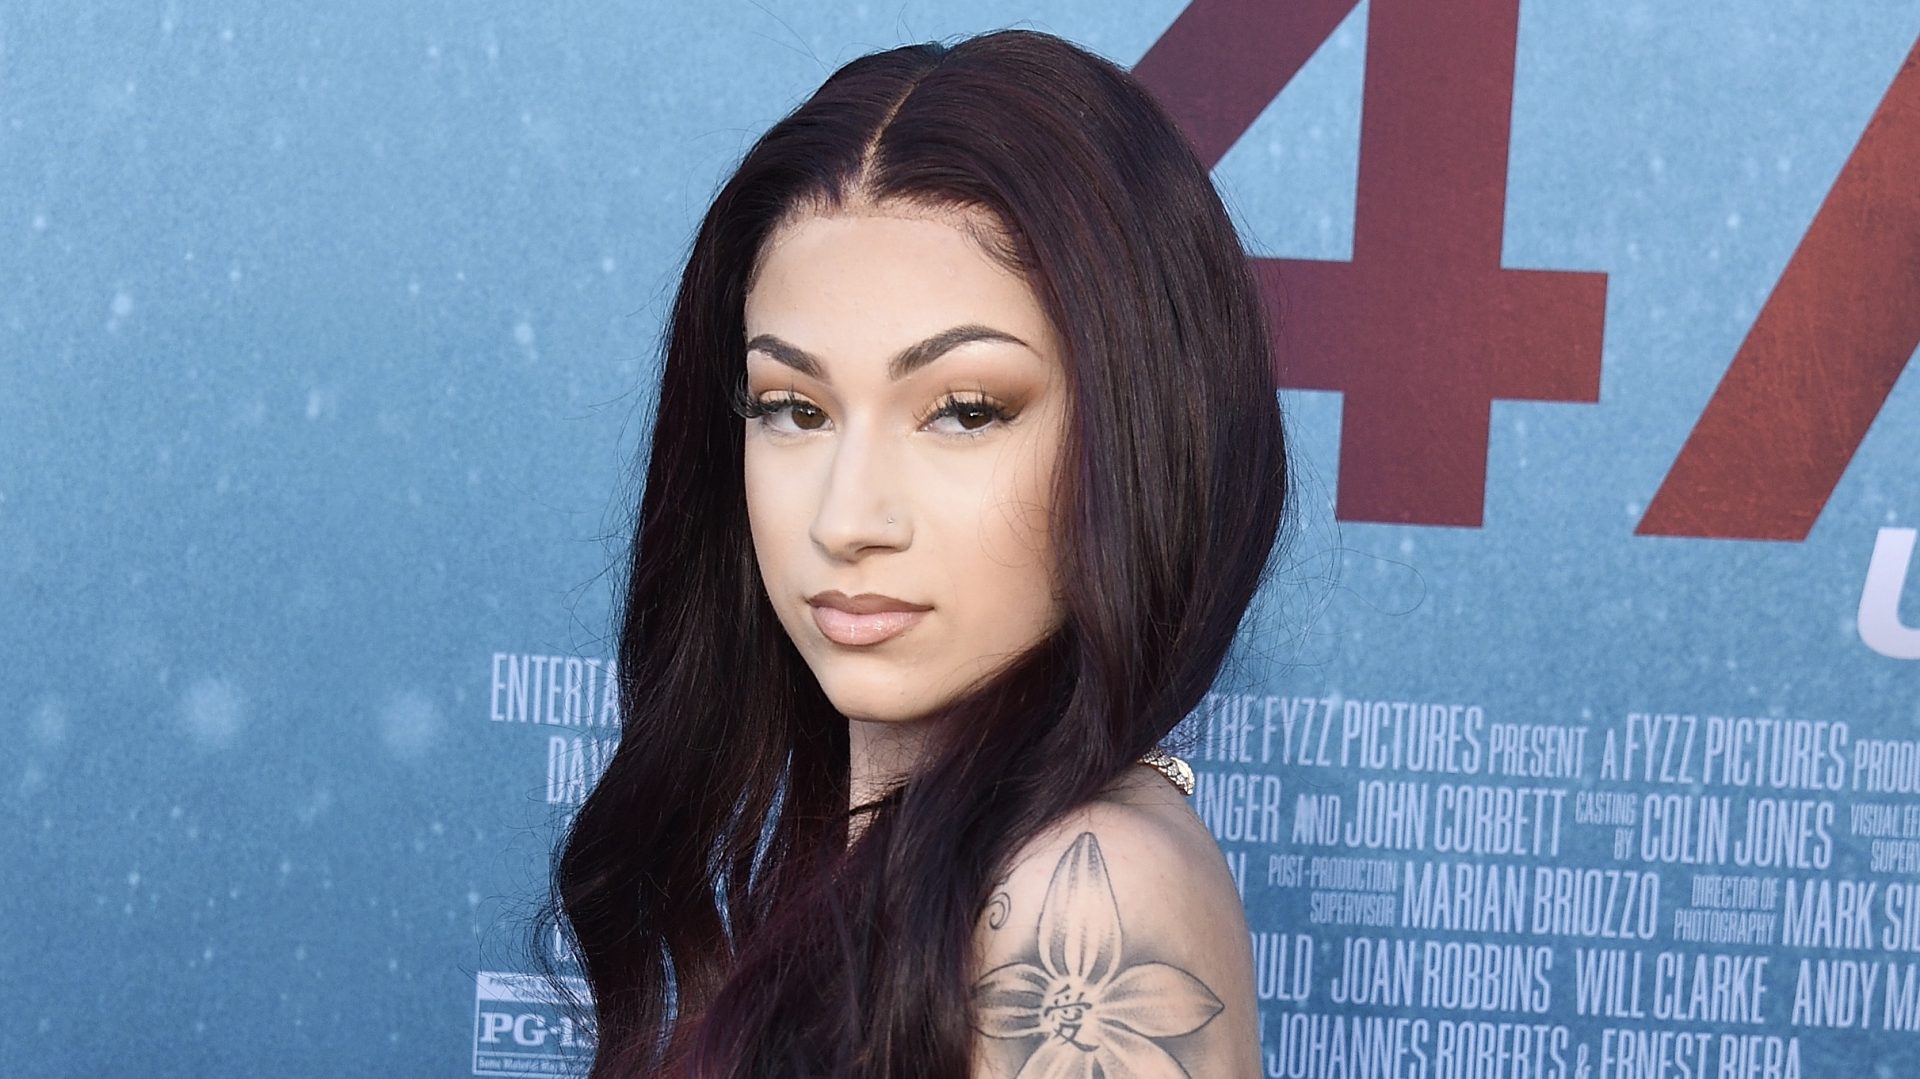 Danielle Bregoli arrives at the LA Premiere Of Entertainment Studios' "47 Meters Down Uncaged" at Regency Village Theatre on August 13, 2019 in Westwood, California.